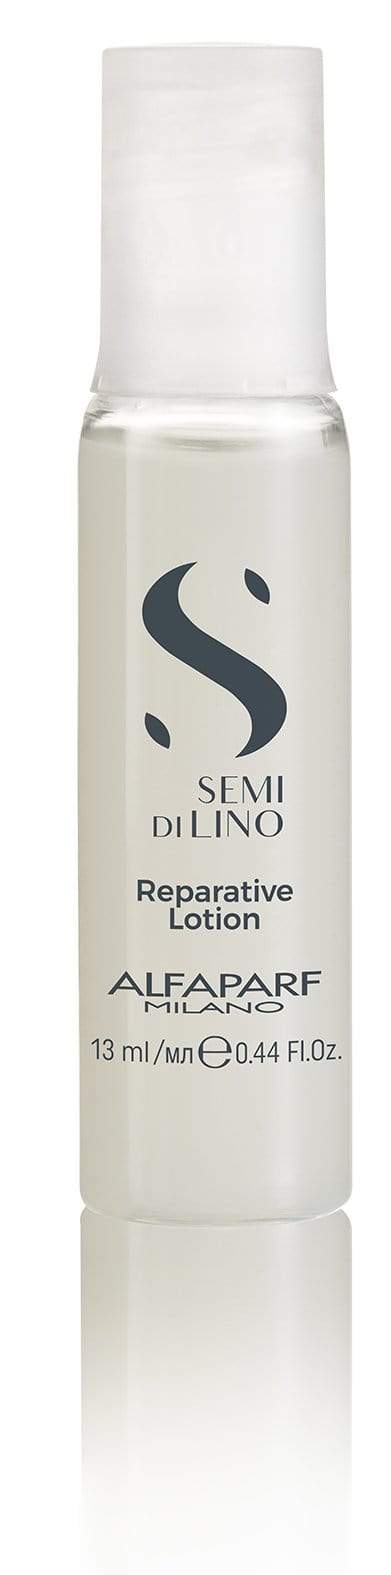 AlfaParf Semi Di Lino Reconstruction Reparative Lotion (For Damaged Hair) 6x13ml best shampoo and conditioner for frizzy 